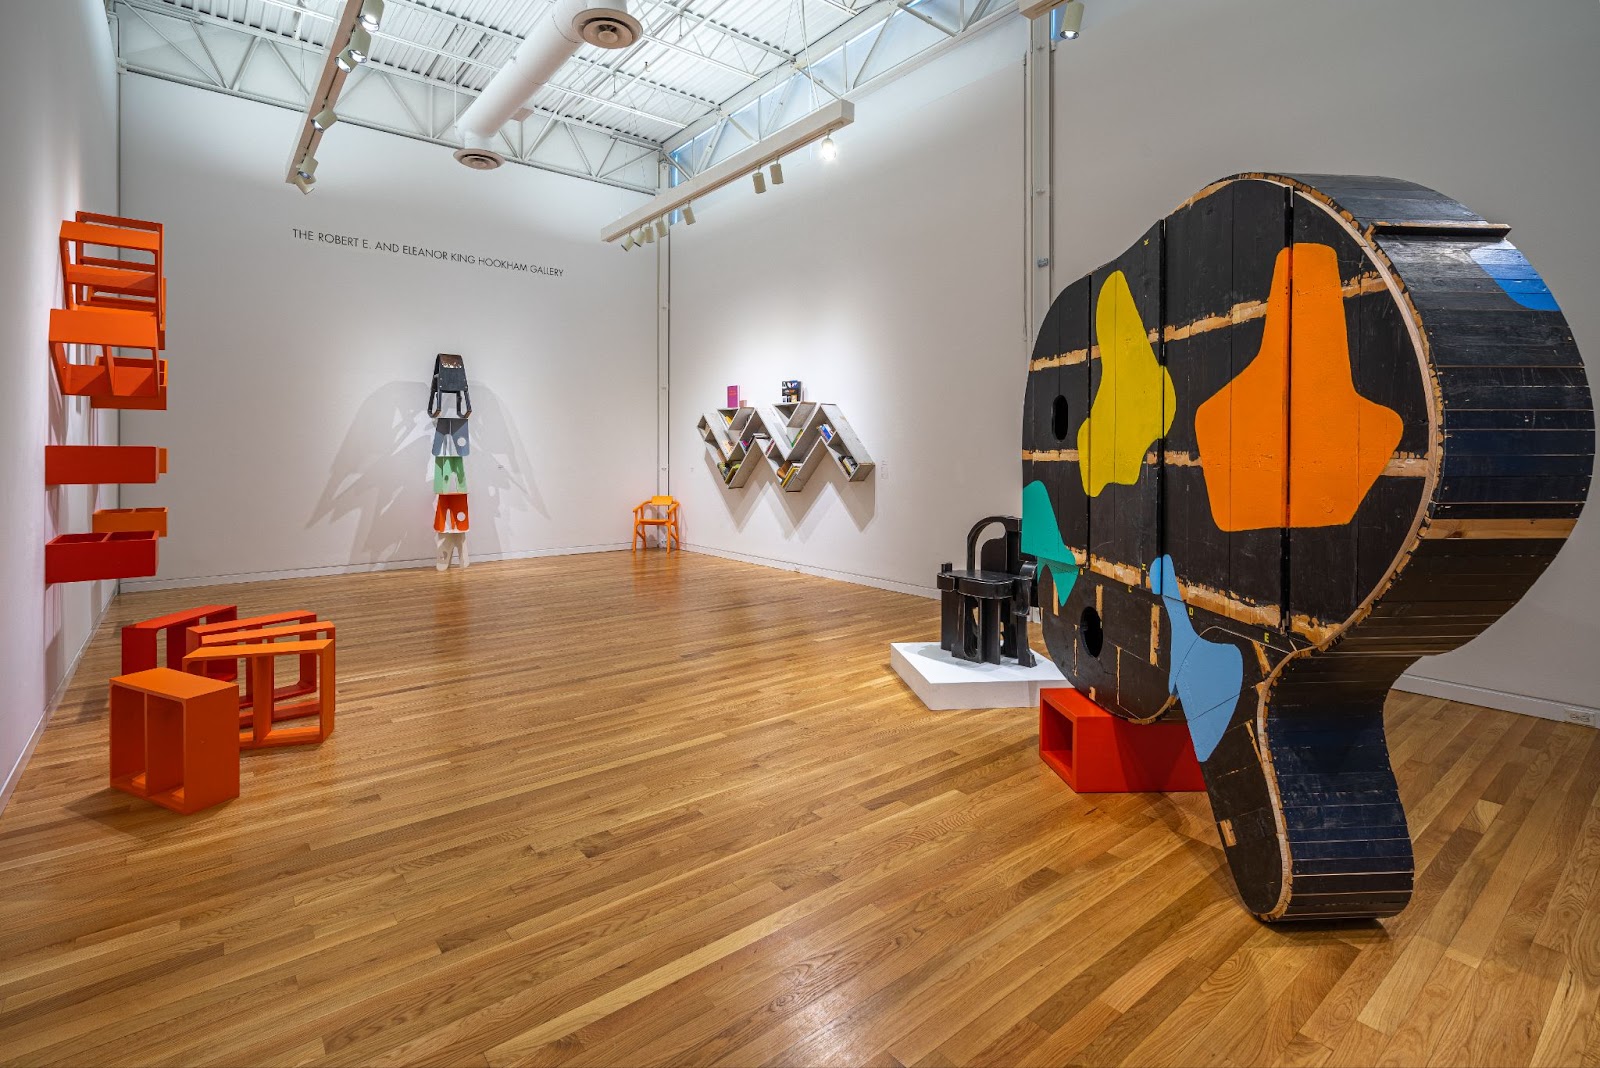 Image: Installation view of A Love Supreme. On the left side of the image, orange wooden boxes are placed on the ground and attached to the wall. On the right side, a large black wooden object is painted with colorful splotches. Two more pieces are mounted on the back walls of the exhibition space. Photograph by Siegfried Mueller, courtesy of the Elmhurst Art Museum. 